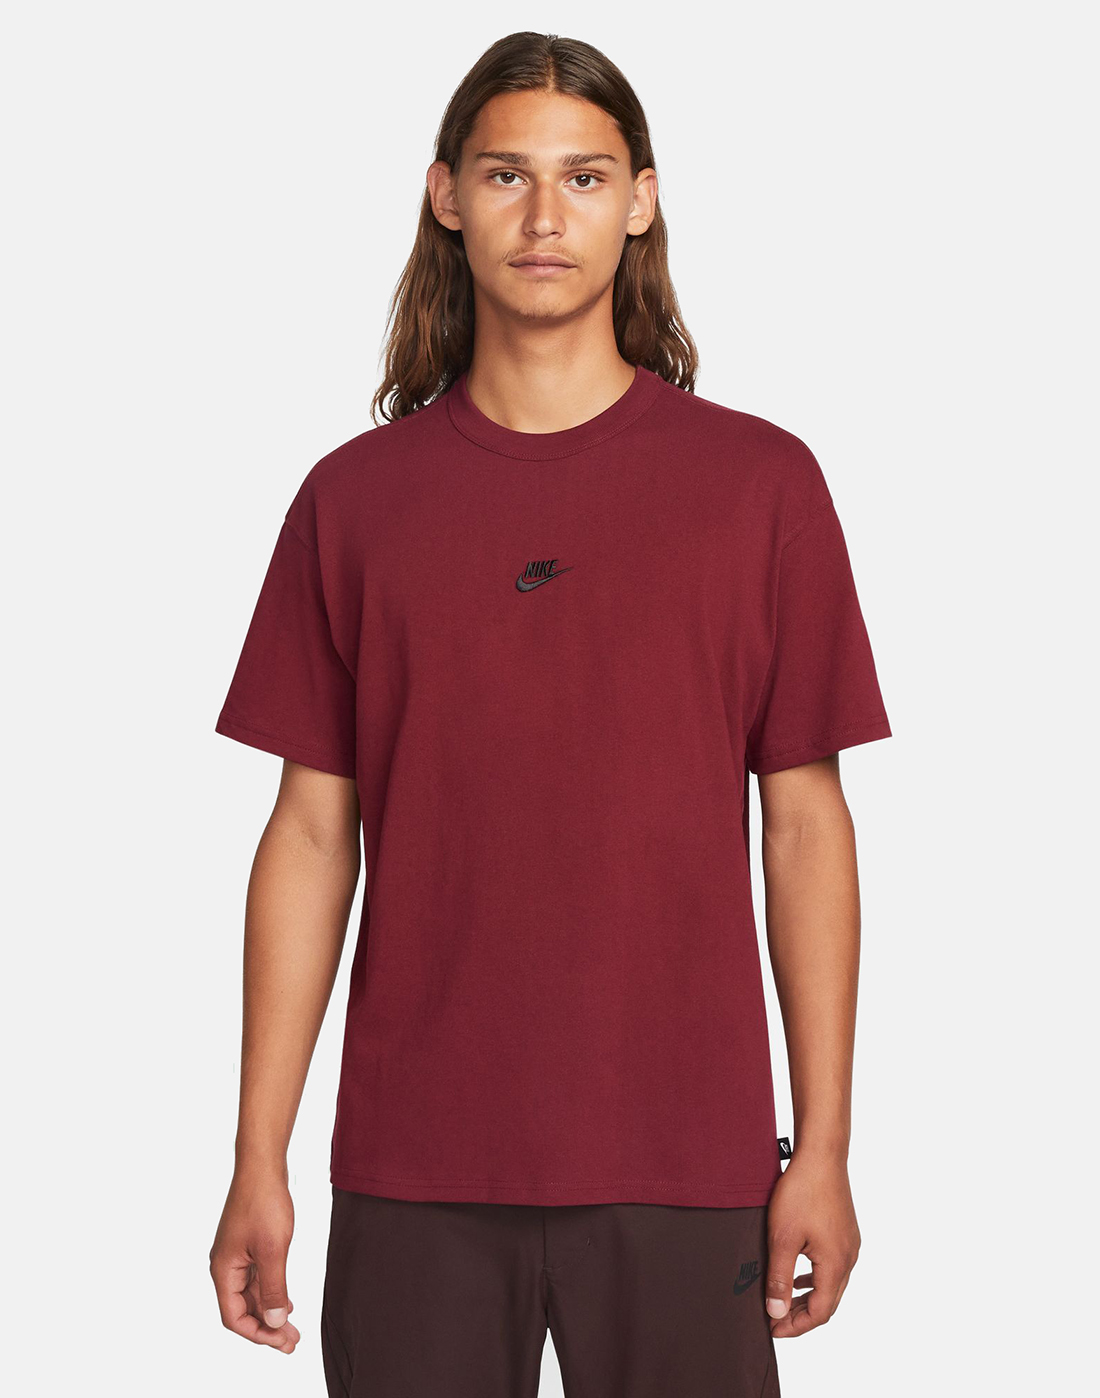 Nike Mens Premium Essential T-Shirt - Red | Life Style Sports UK